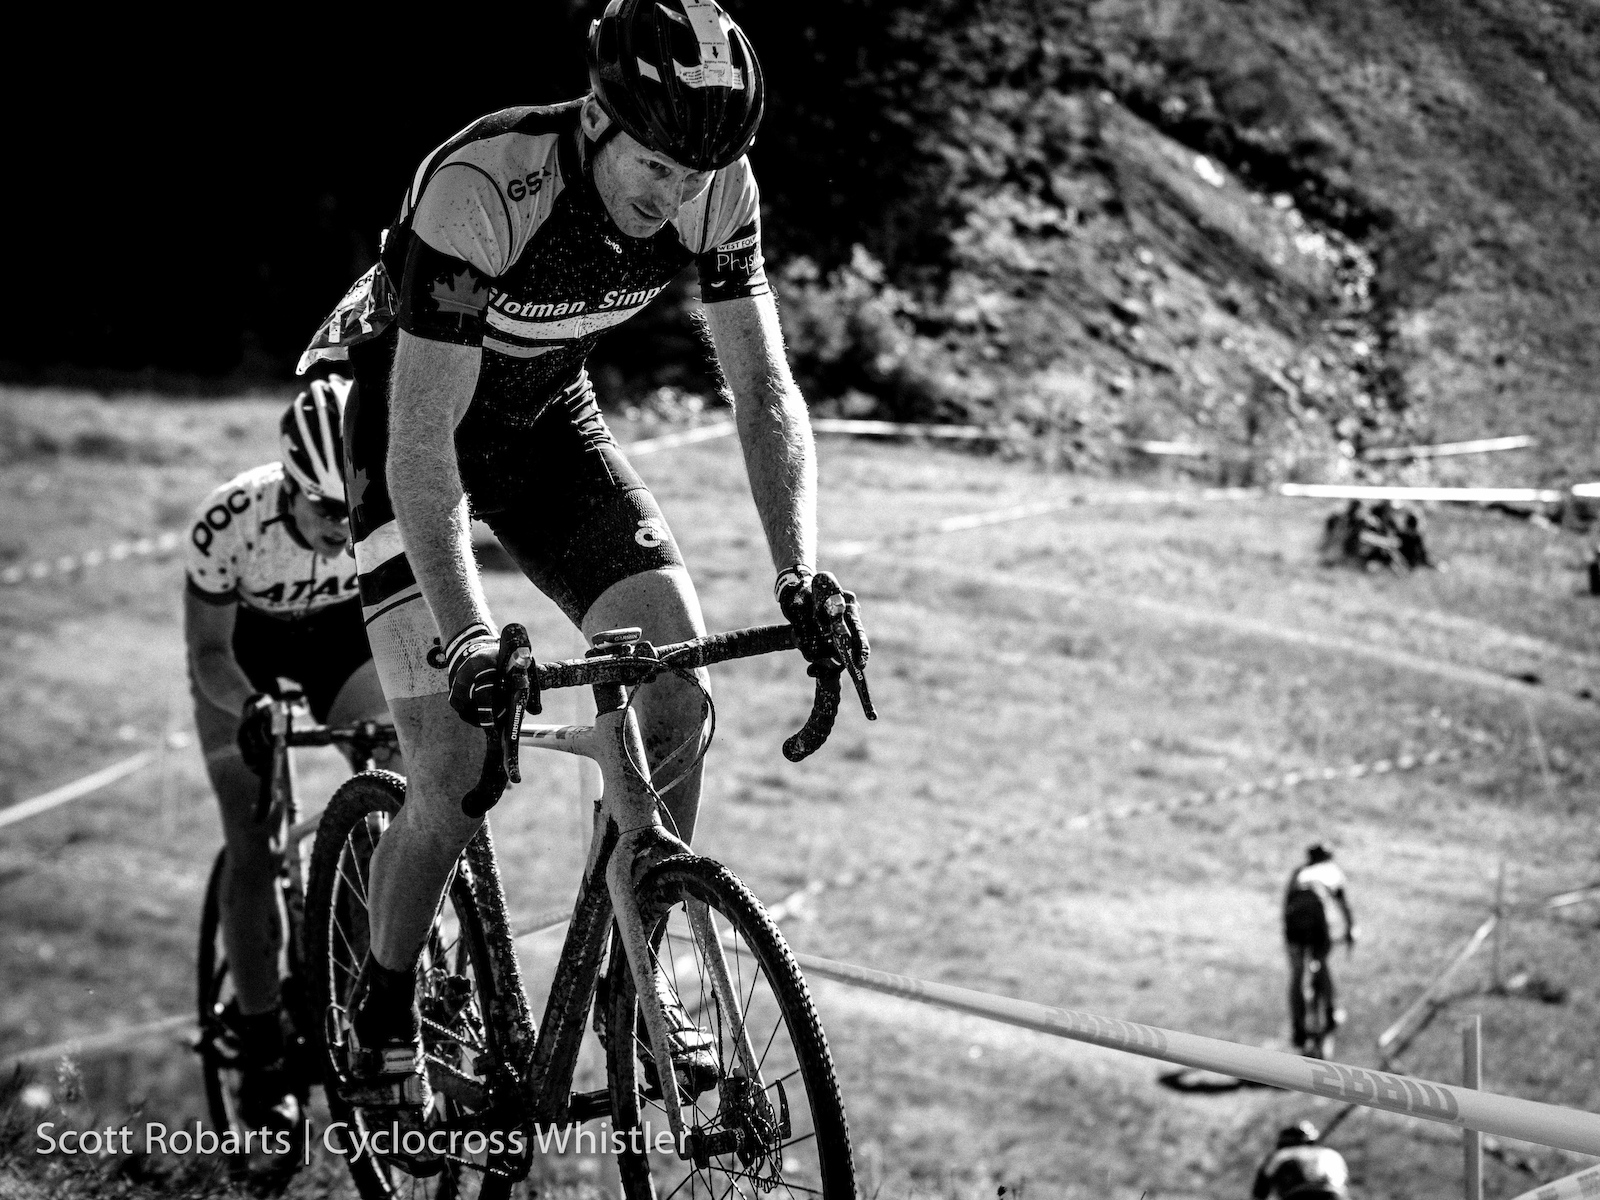 Bob Welbourne - Cyclocross Whistler (Photo by: Scott Robarts)